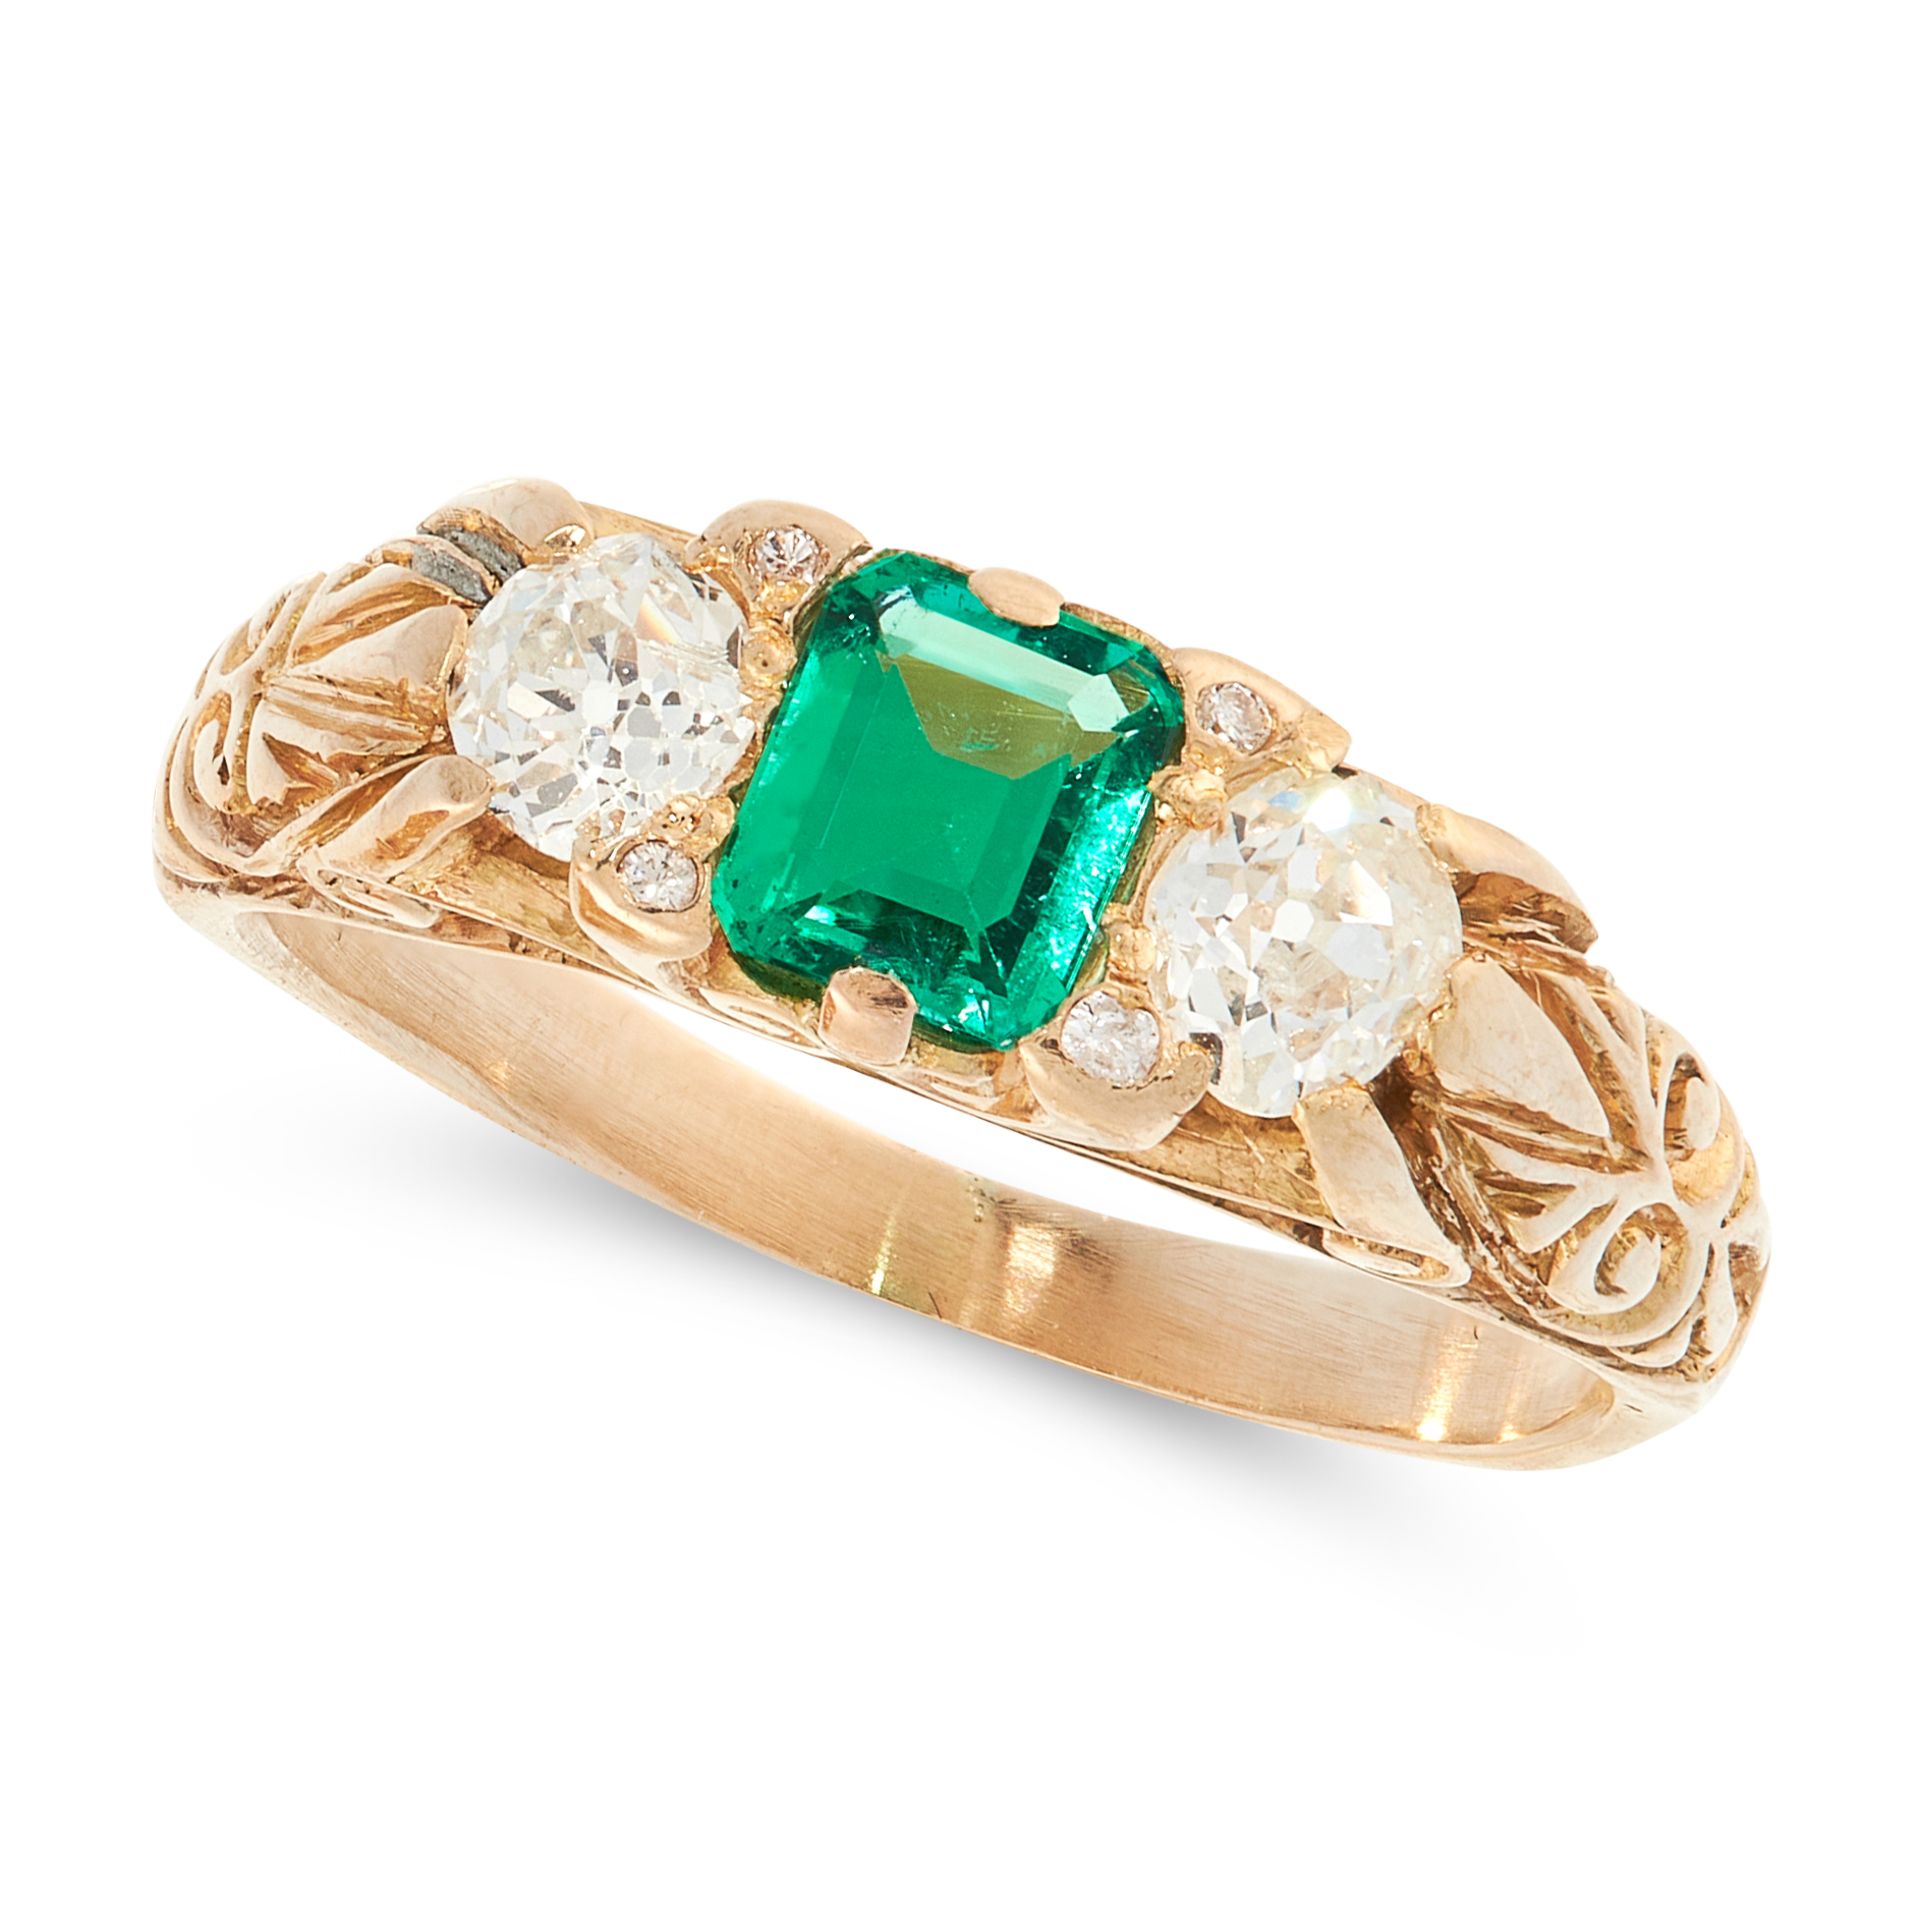 AN ANTIQUE EMERALD AND DIAMOND DRESS RING in high carat yellow gold, set with an emerald cut emerald